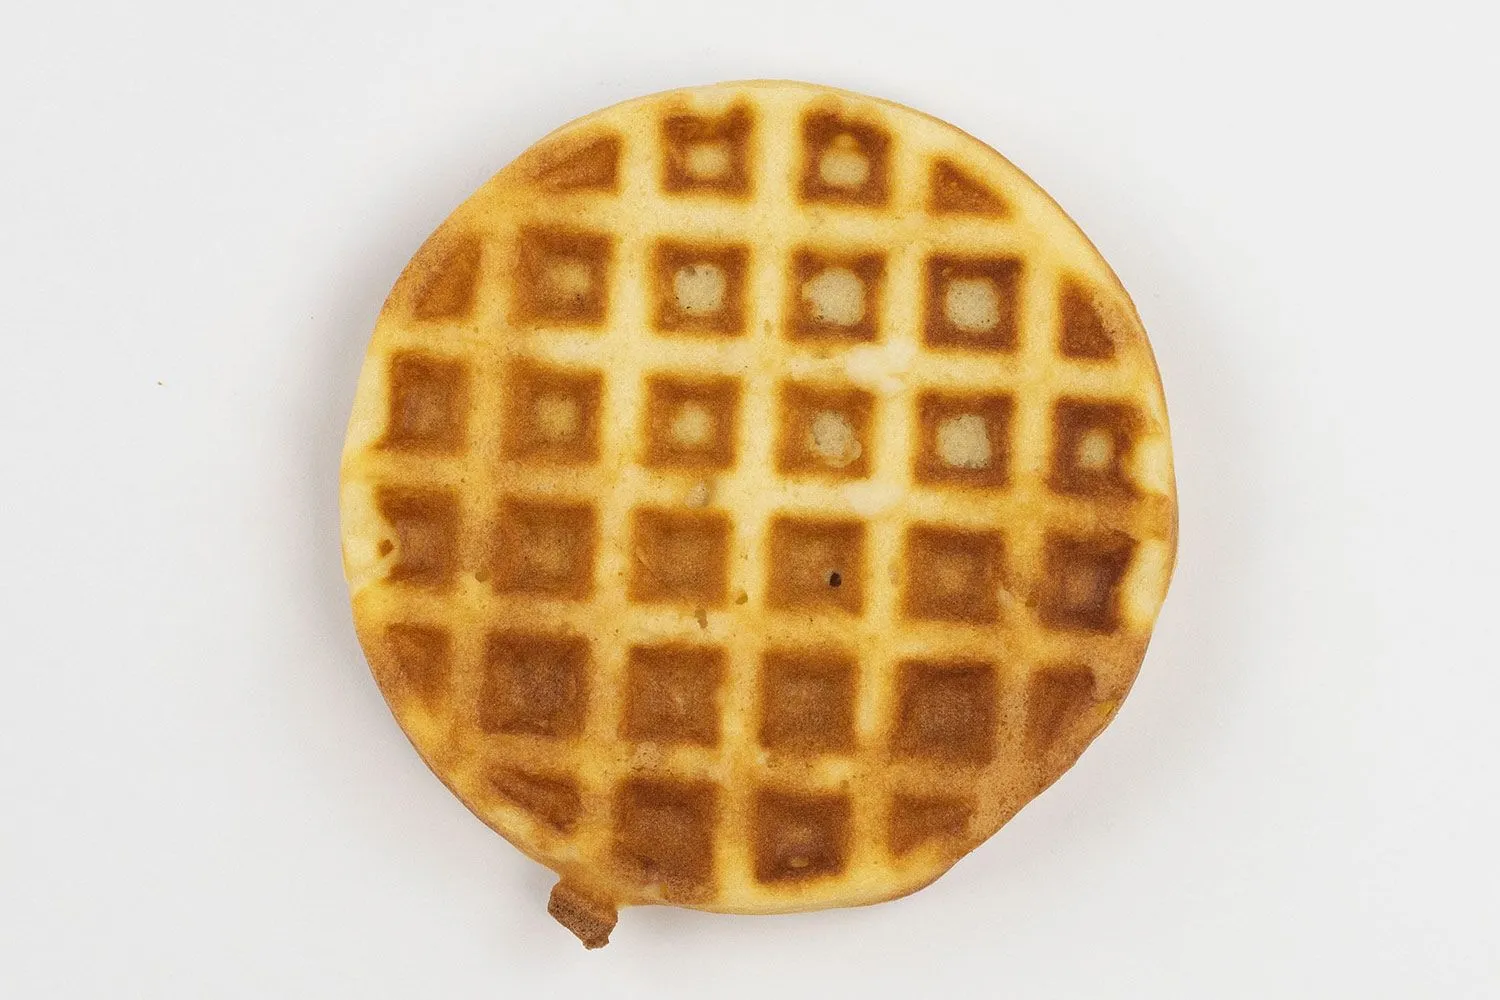 The 8 Most Fun Waffle Makers –